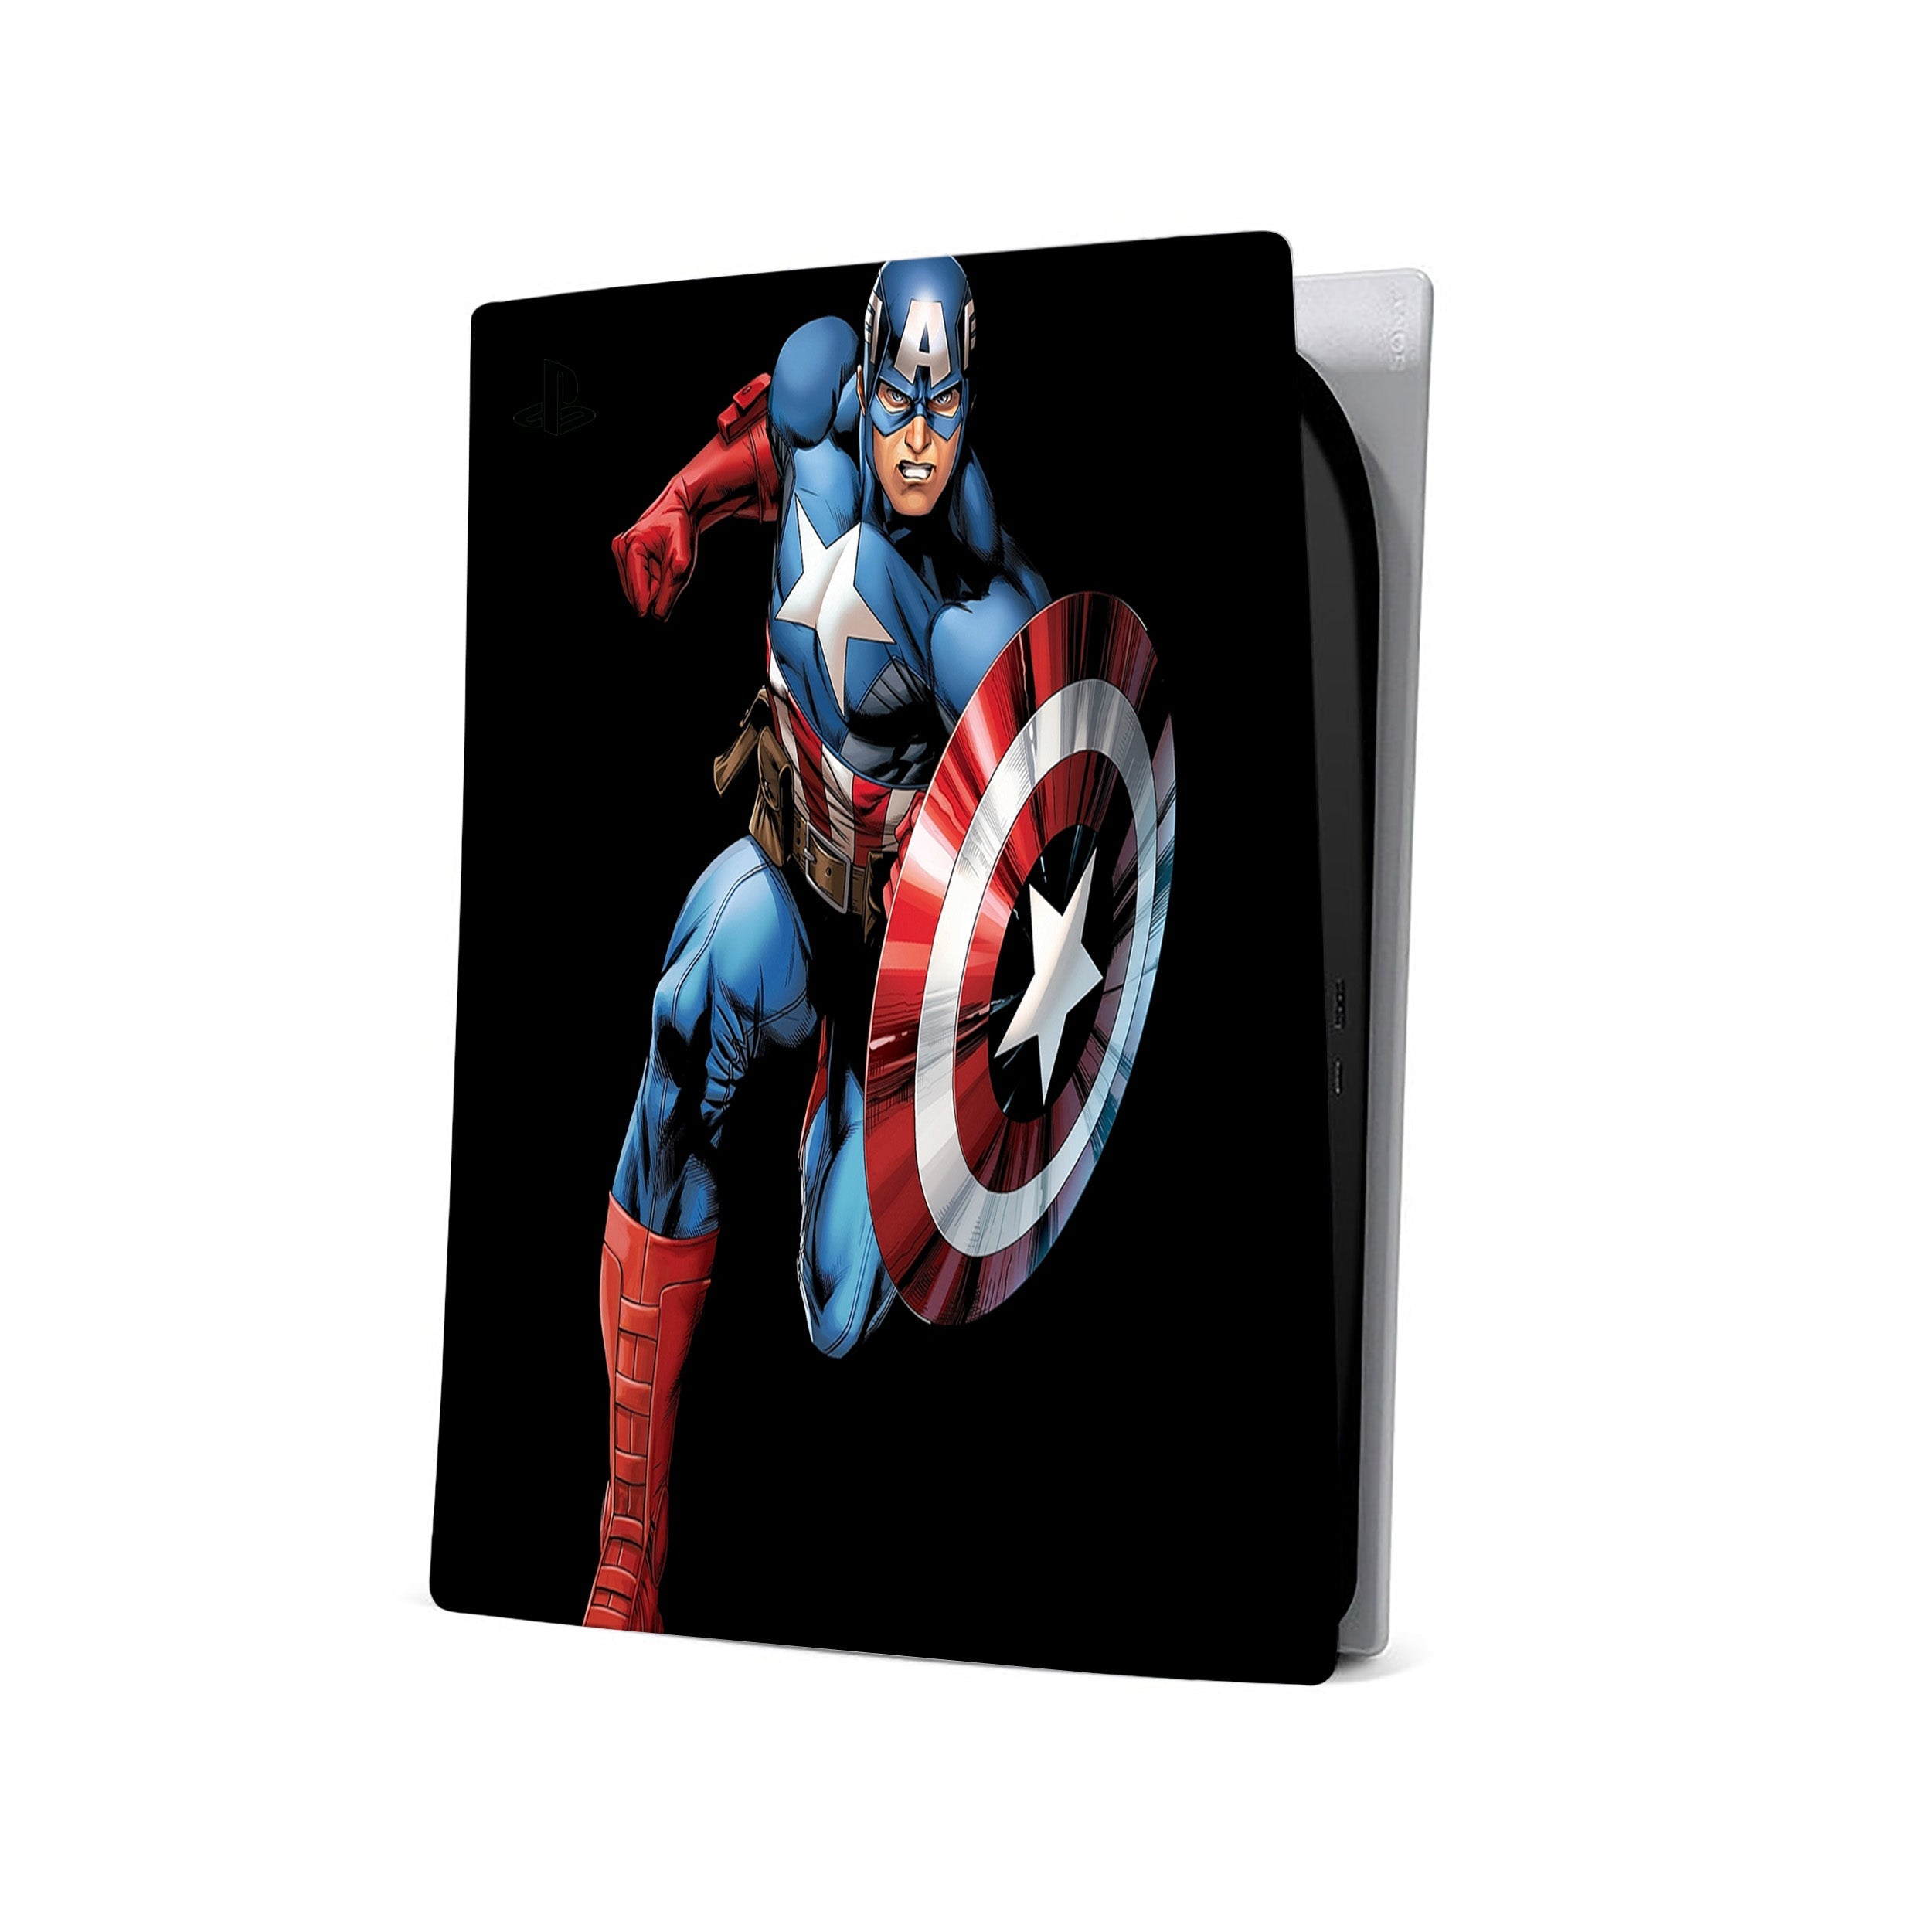 A video game skin featuring a Marvel Comics Captain America design for the PS5.